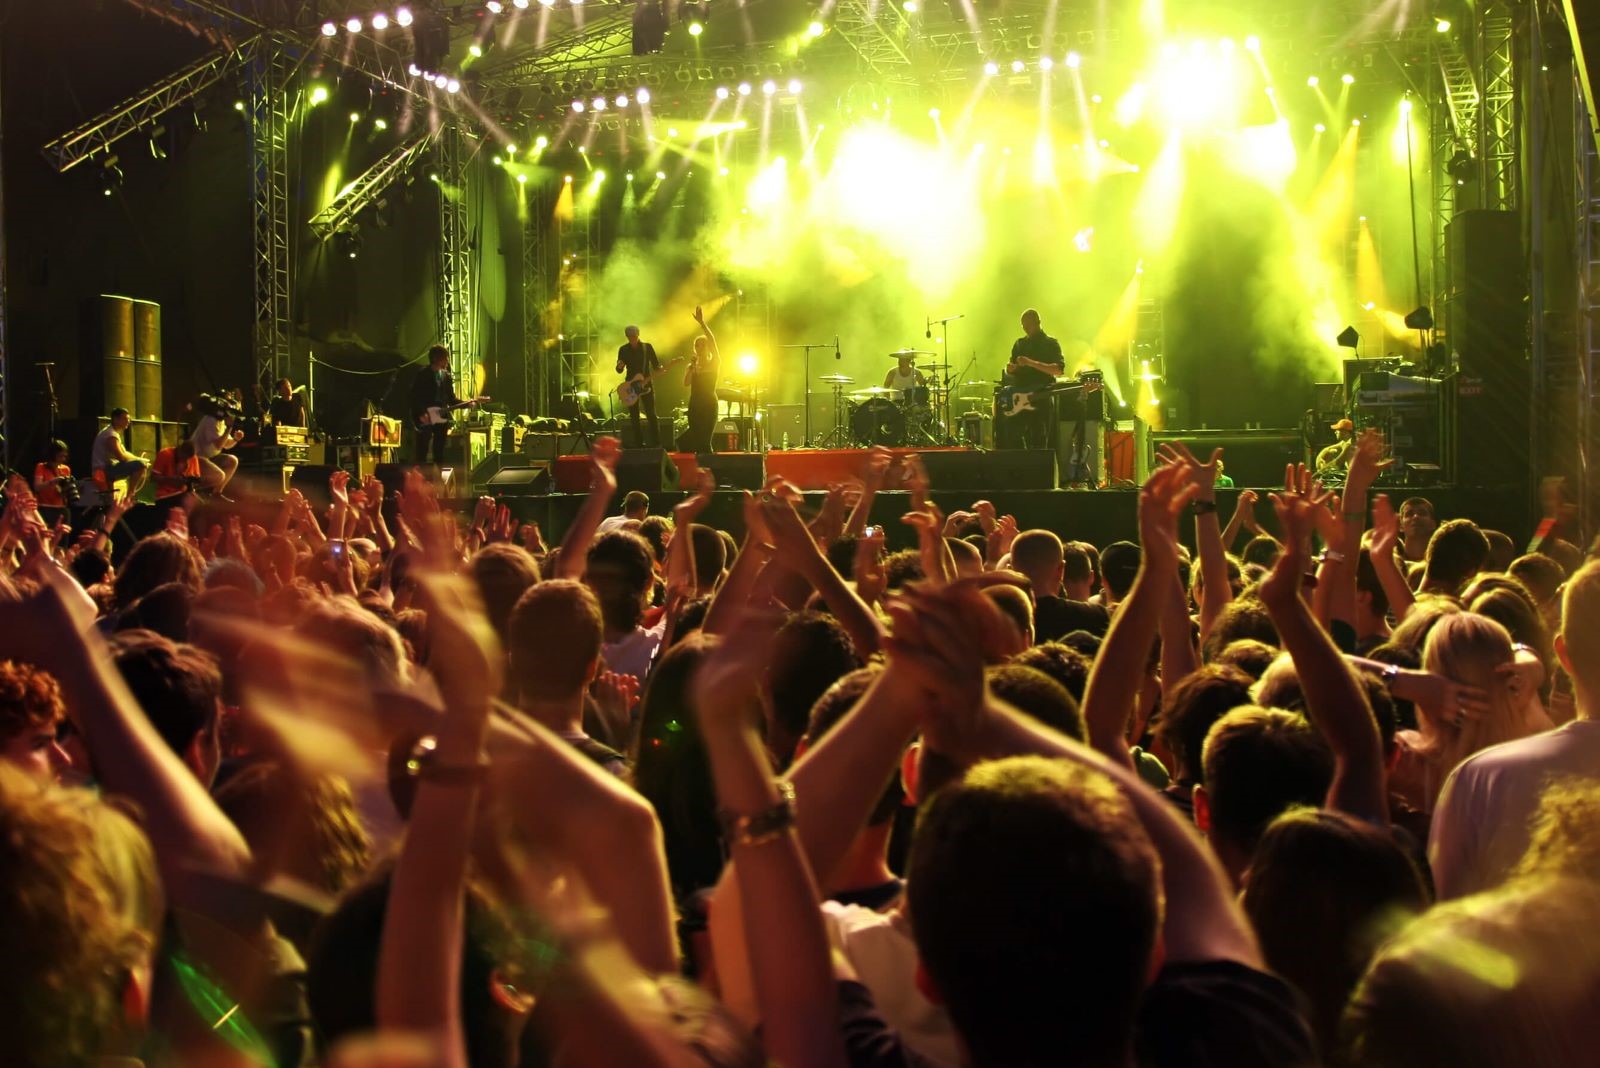 Protecting your hearing at outdoor events this summer